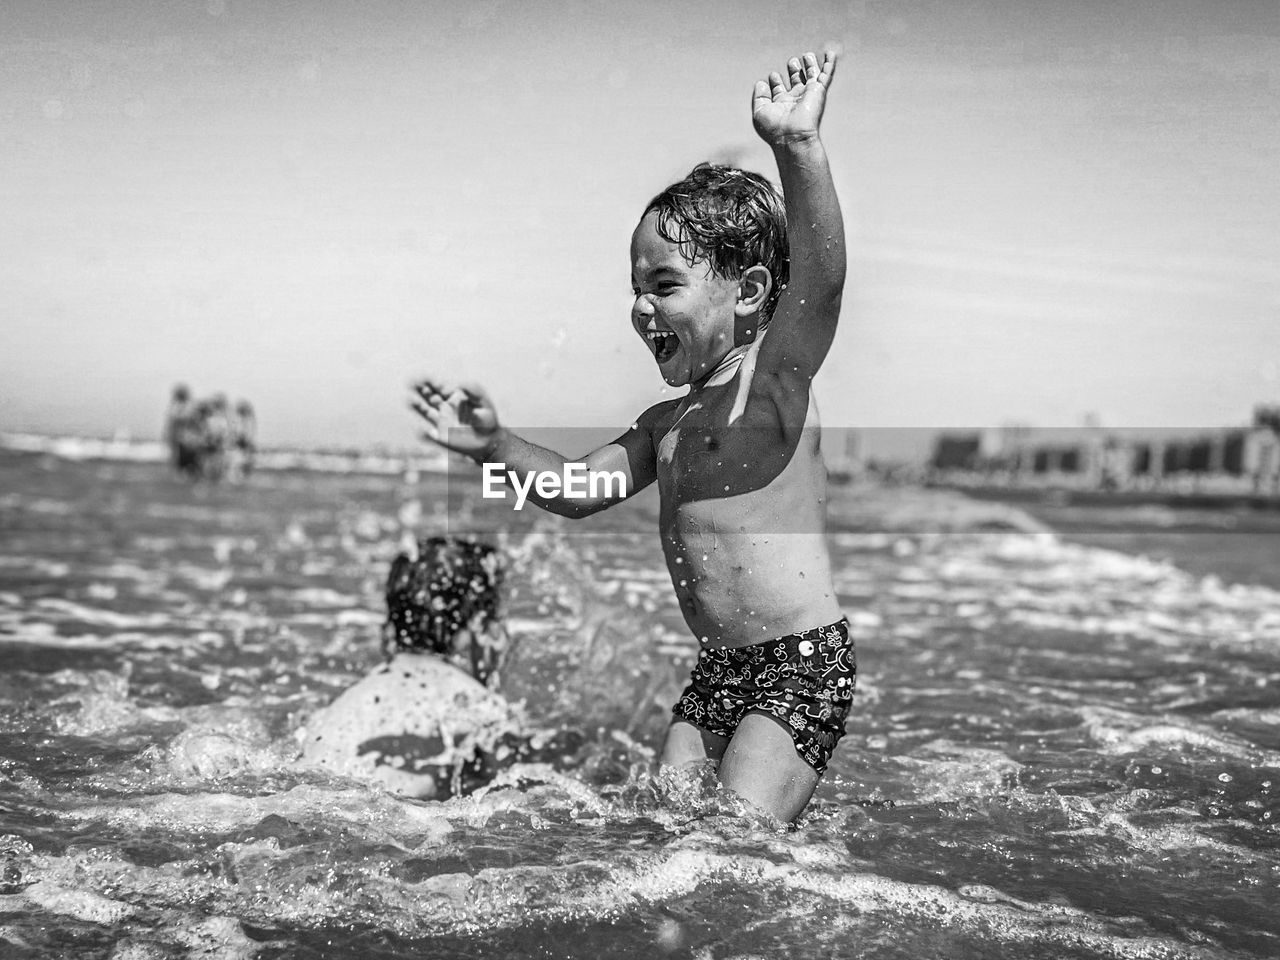 water, child, childhood, black and white, swimming, monochrome photography, motion, nature, splashing, fun, monochrome, happiness, emotion, enjoyment, one person, sea, men, lifestyles, leisure activity, female, full length, summer, day, women, swimwear, outdoors, sky, positive emotion, wet, sports, smiling, holiday, trip, vacation, white, land, black, cheerful, clothing, focus on foreground, beach, person, joy